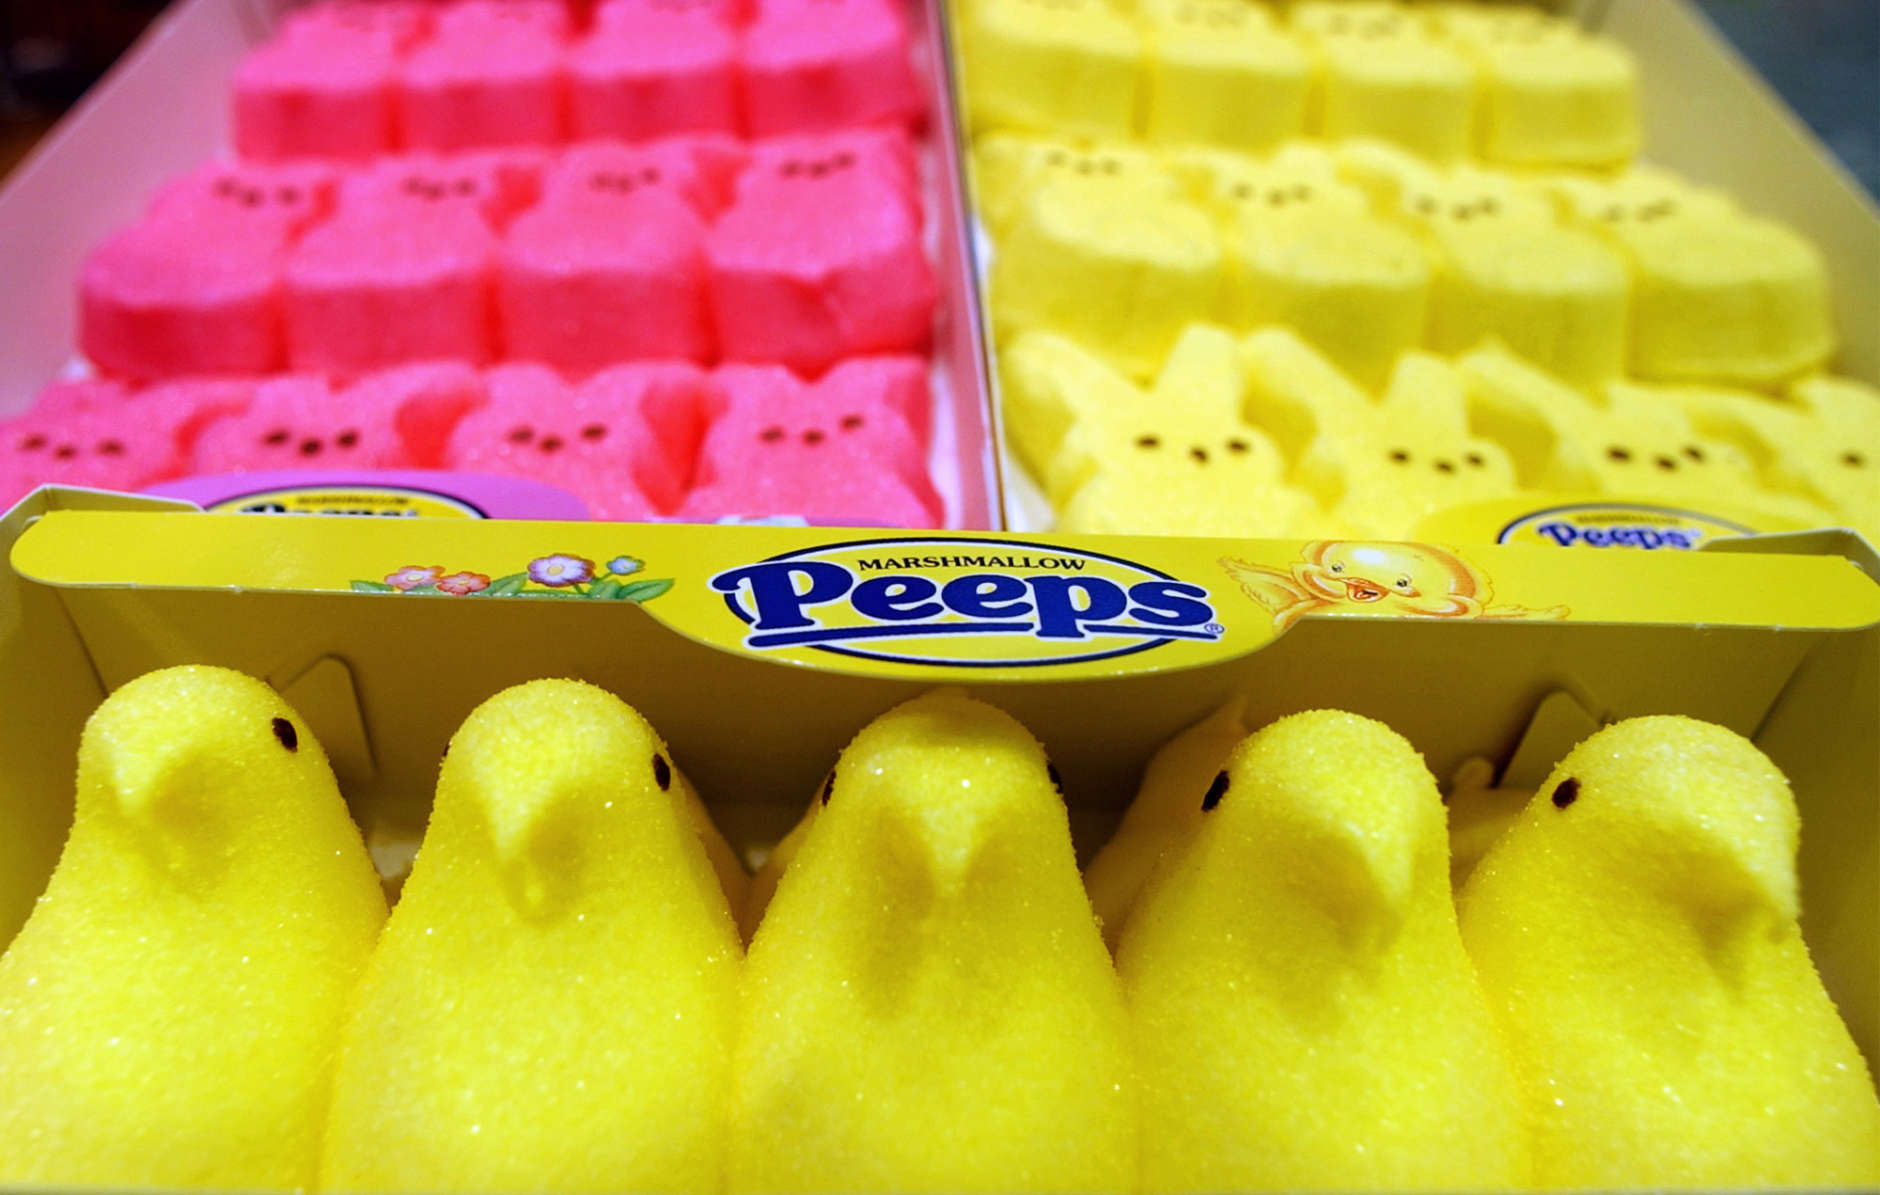 Boxes of Marshmallow Peeps are lined up at the Just Born factory in Bethlehem, Pa., on April 2, 2003. Just Born Inc. is celebrating its 50th year of adorning Easter baskets and satisfying sweet tooths with the colorful confections. (AP Photo/Rick Smith)